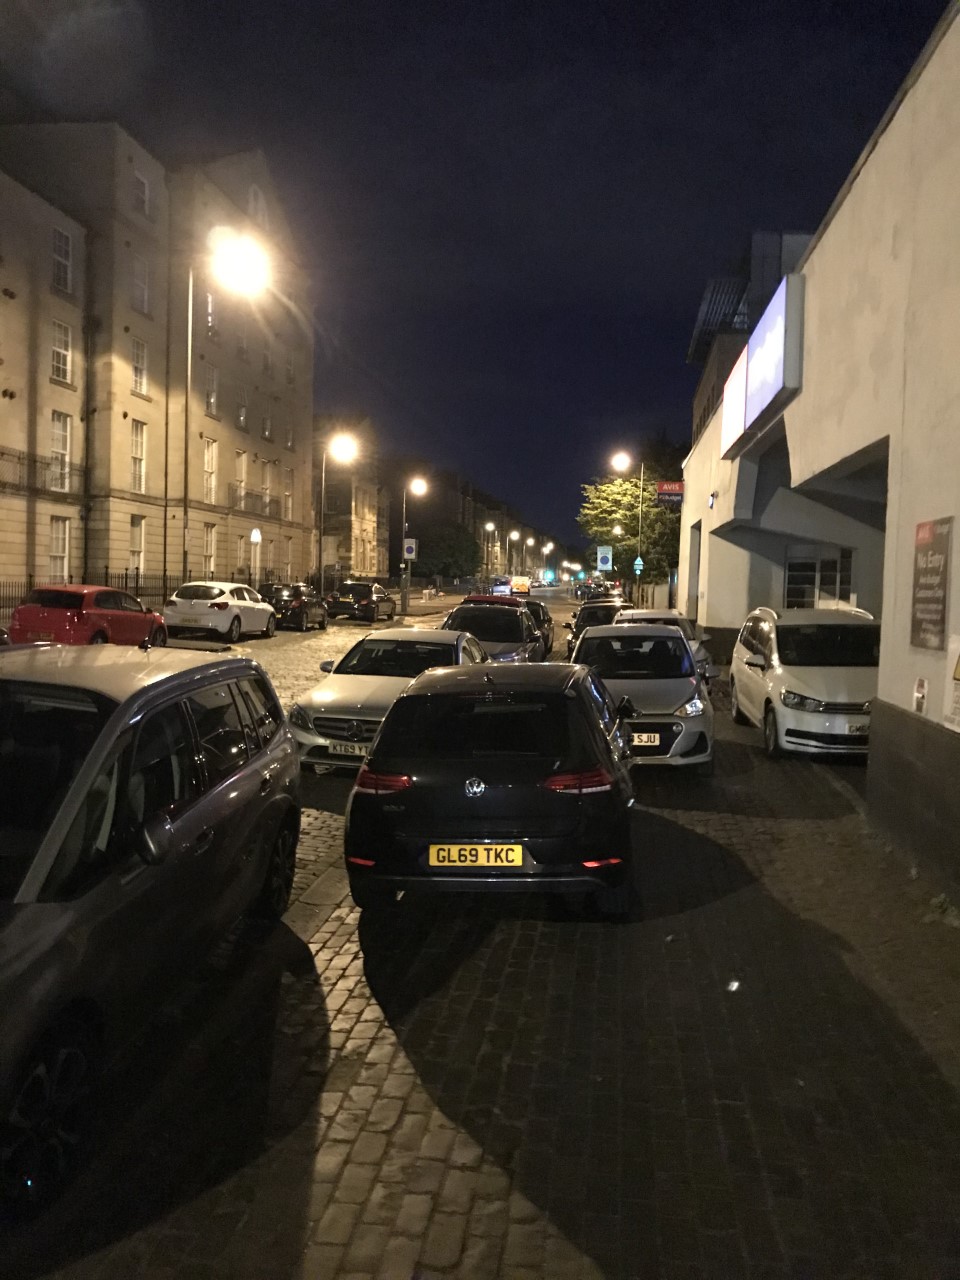 parked cars in the dark